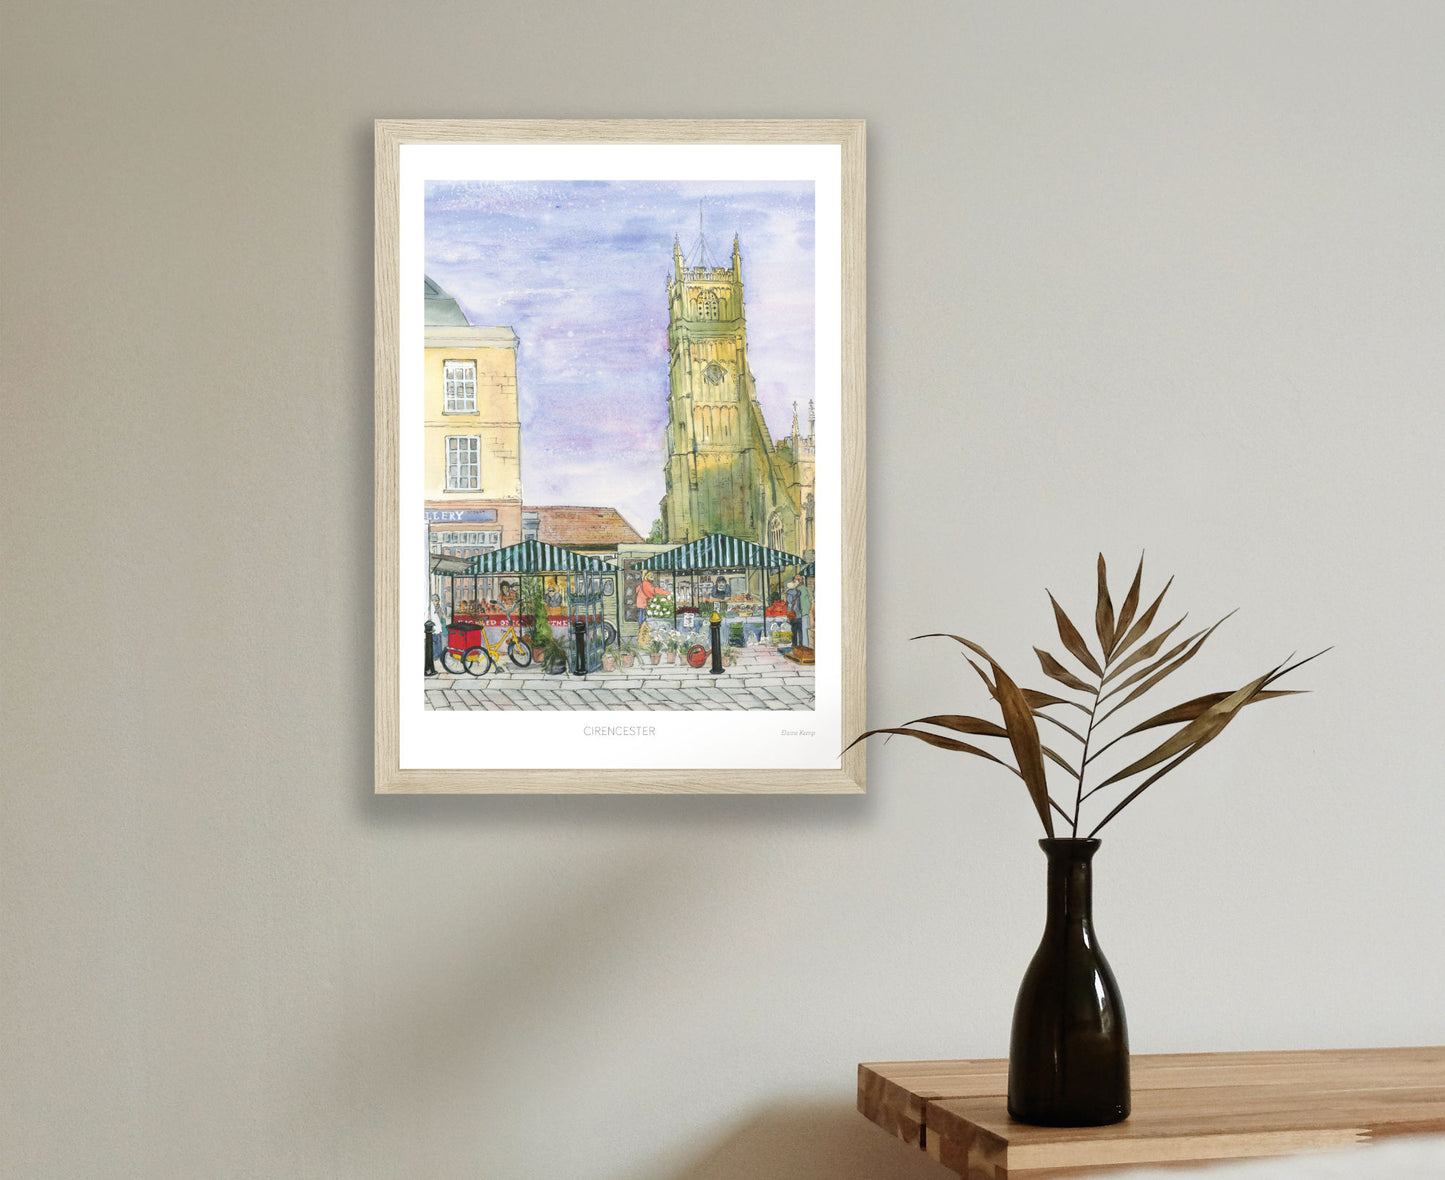 Cirencester Market and Church Watercolour Print in wood frame